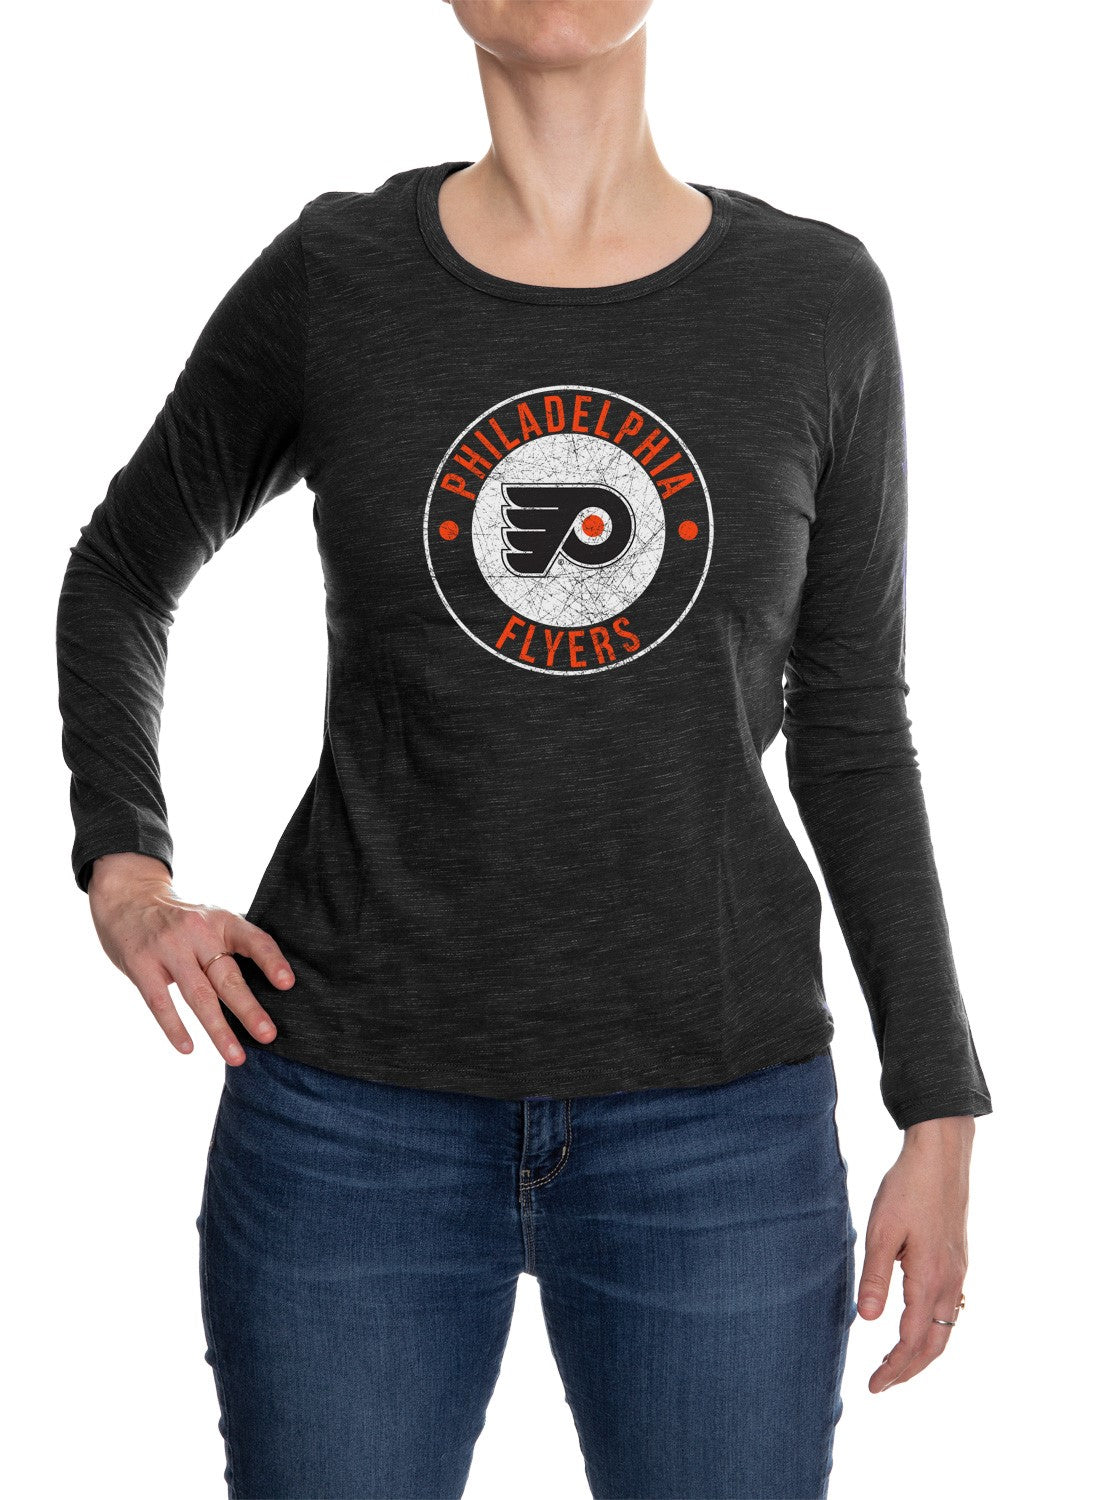 Philadelphia Flyers Distressed Logo Long Sleeve Shirt for Women in Black Front View